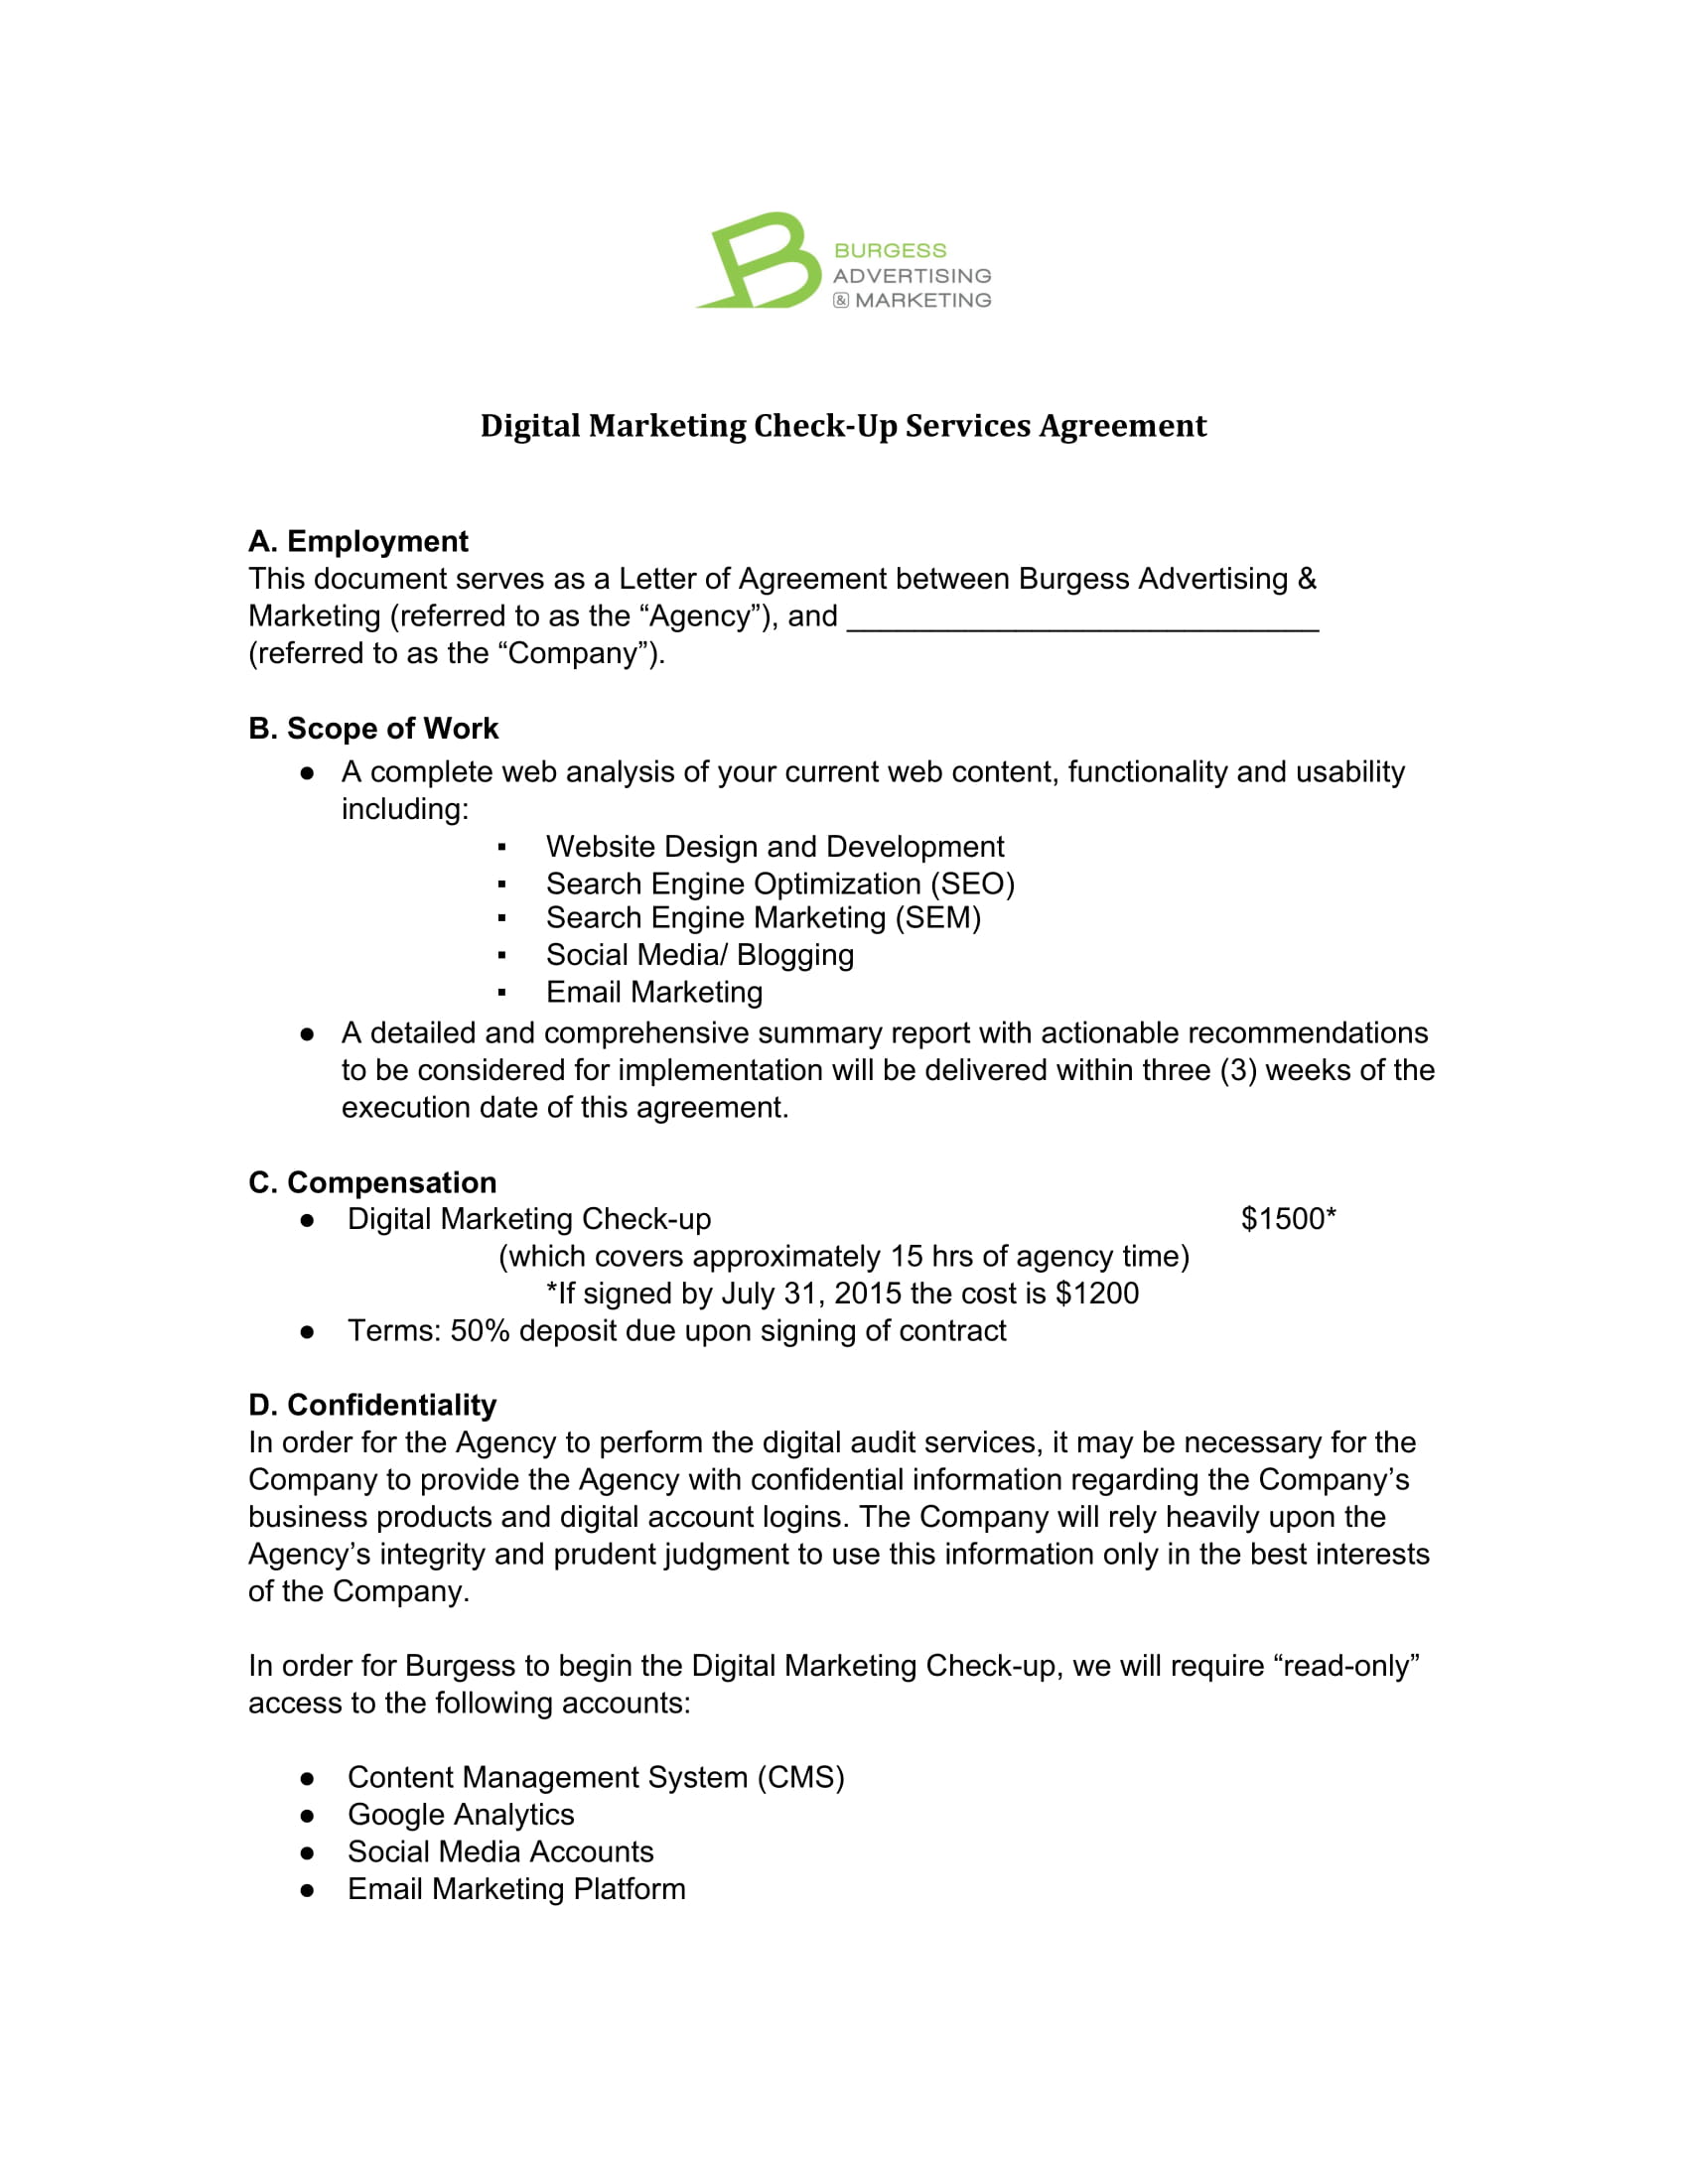 Digital Marketing Check-Up Services Agreement Example